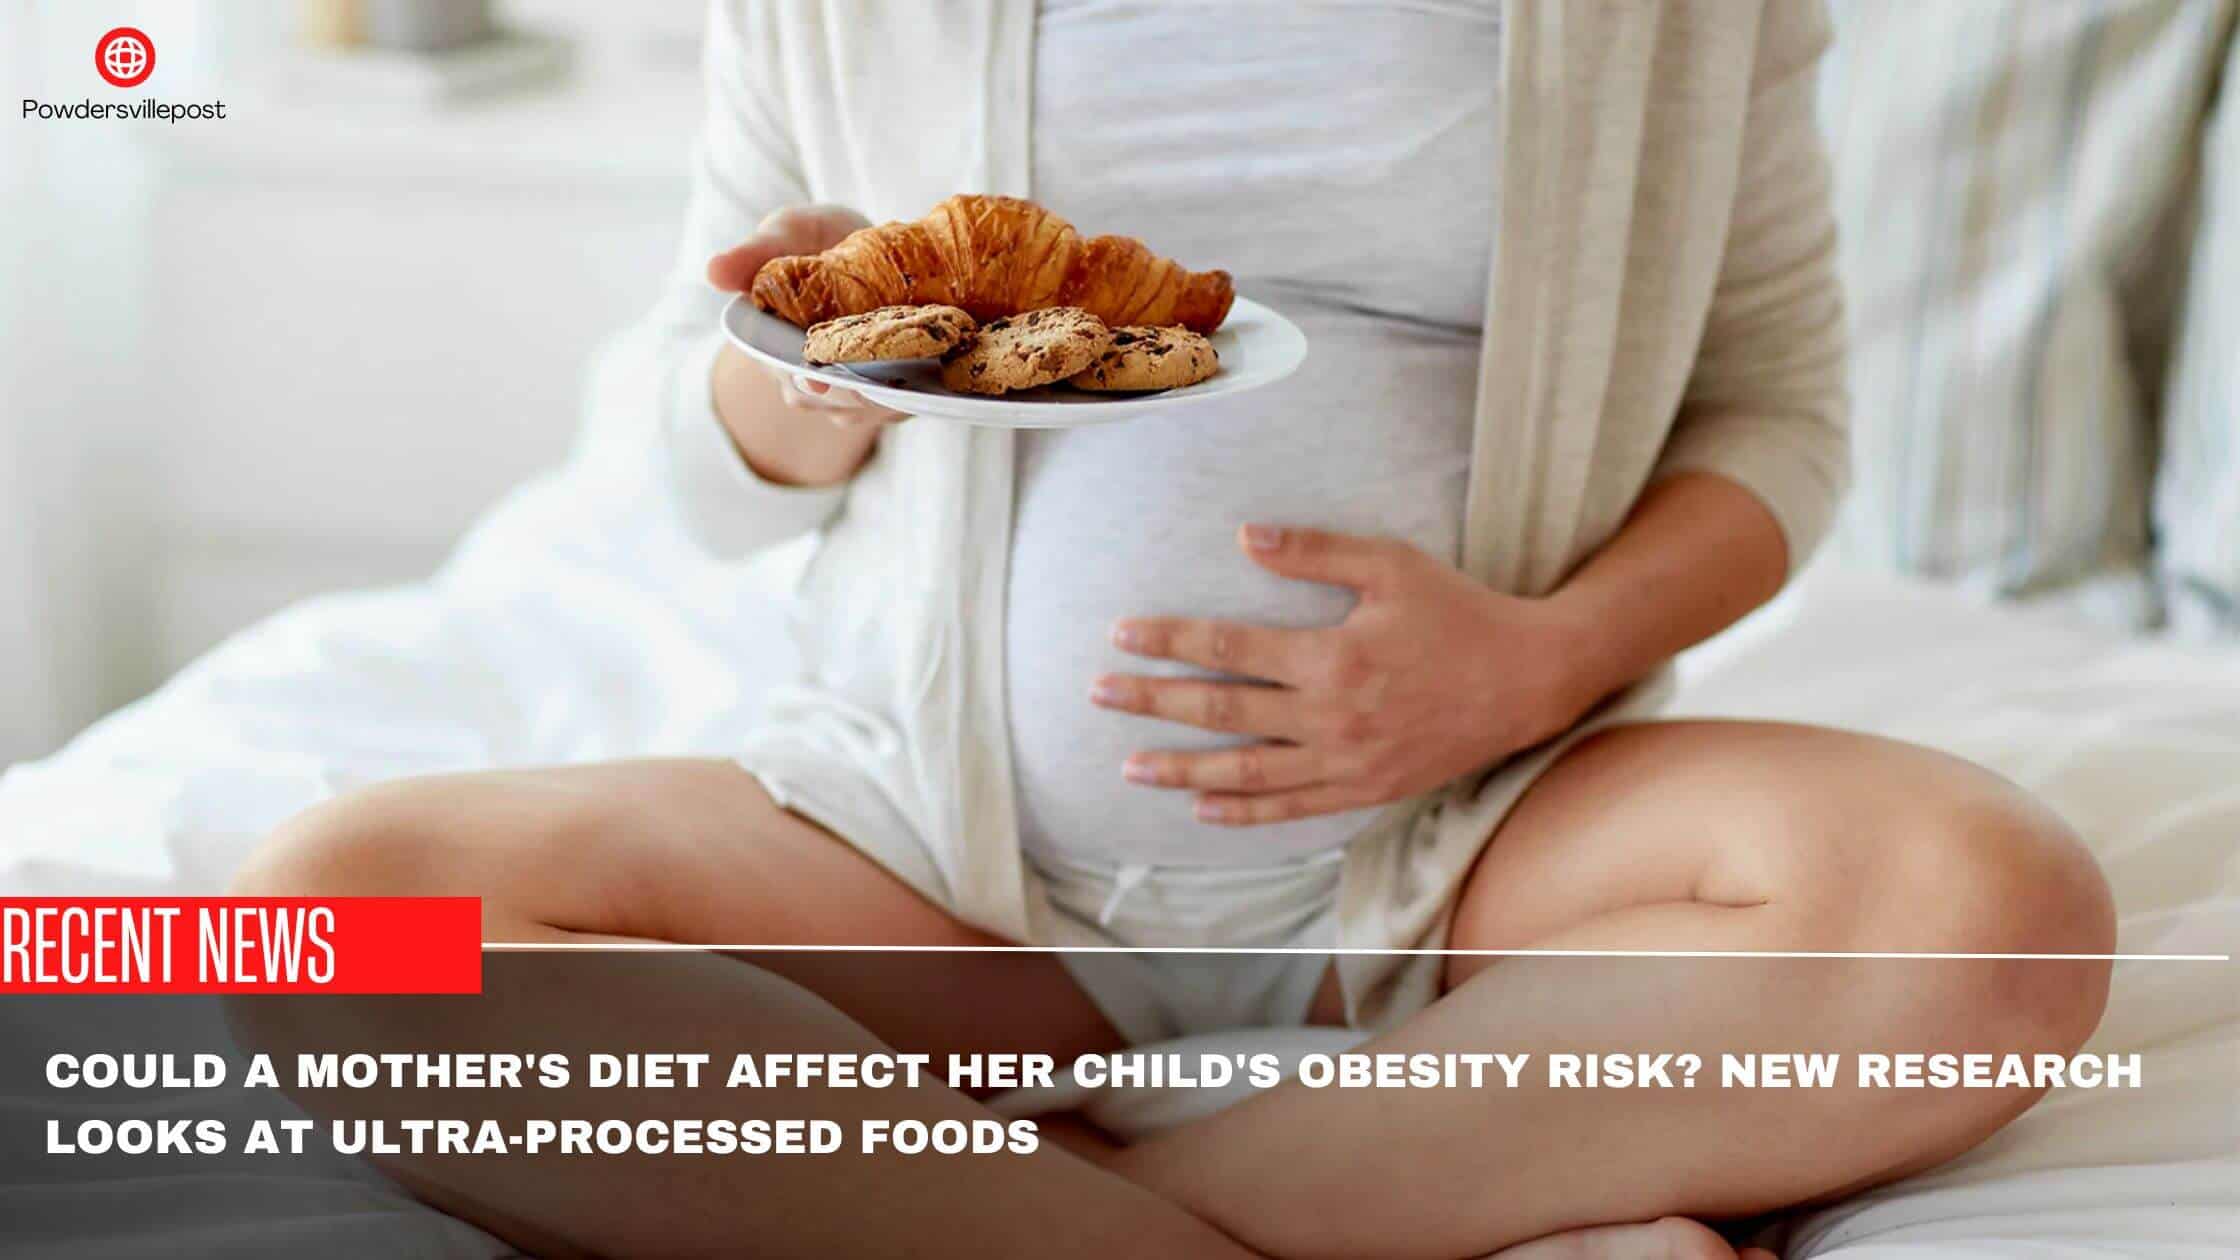 Could A Mother's Diet Affect Her Child's Obesity Risk New Research Looks At Ultra-Processed Foods